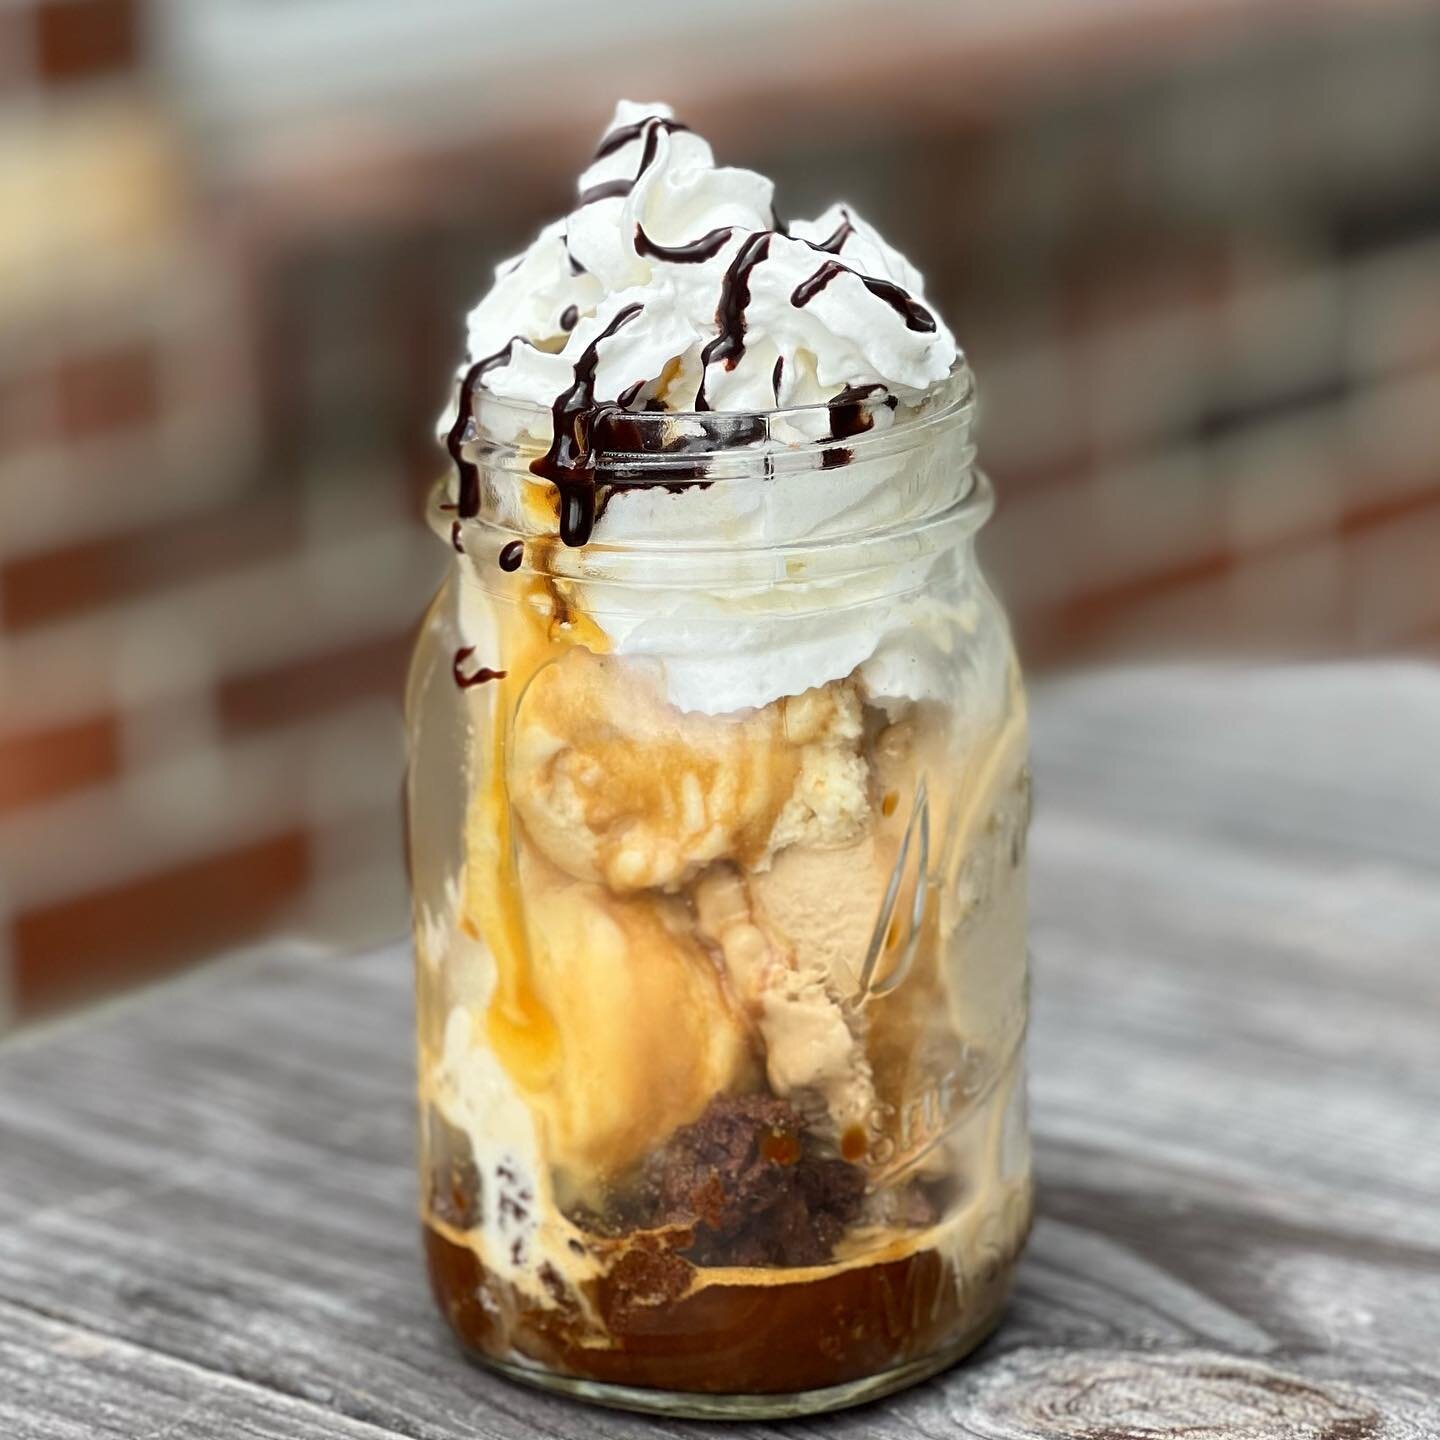 It&rsquo;s almost the weekend, treat yourself with our Sundae Special! 

Crumbled brownies, Salted Caramel Gelato, Coffee gelato, drizzled with espresso, whipped cream and chocolate sauce. 

Open &lsquo;til 6:00! 

@tuttogelatocafe @risingcreekbakery